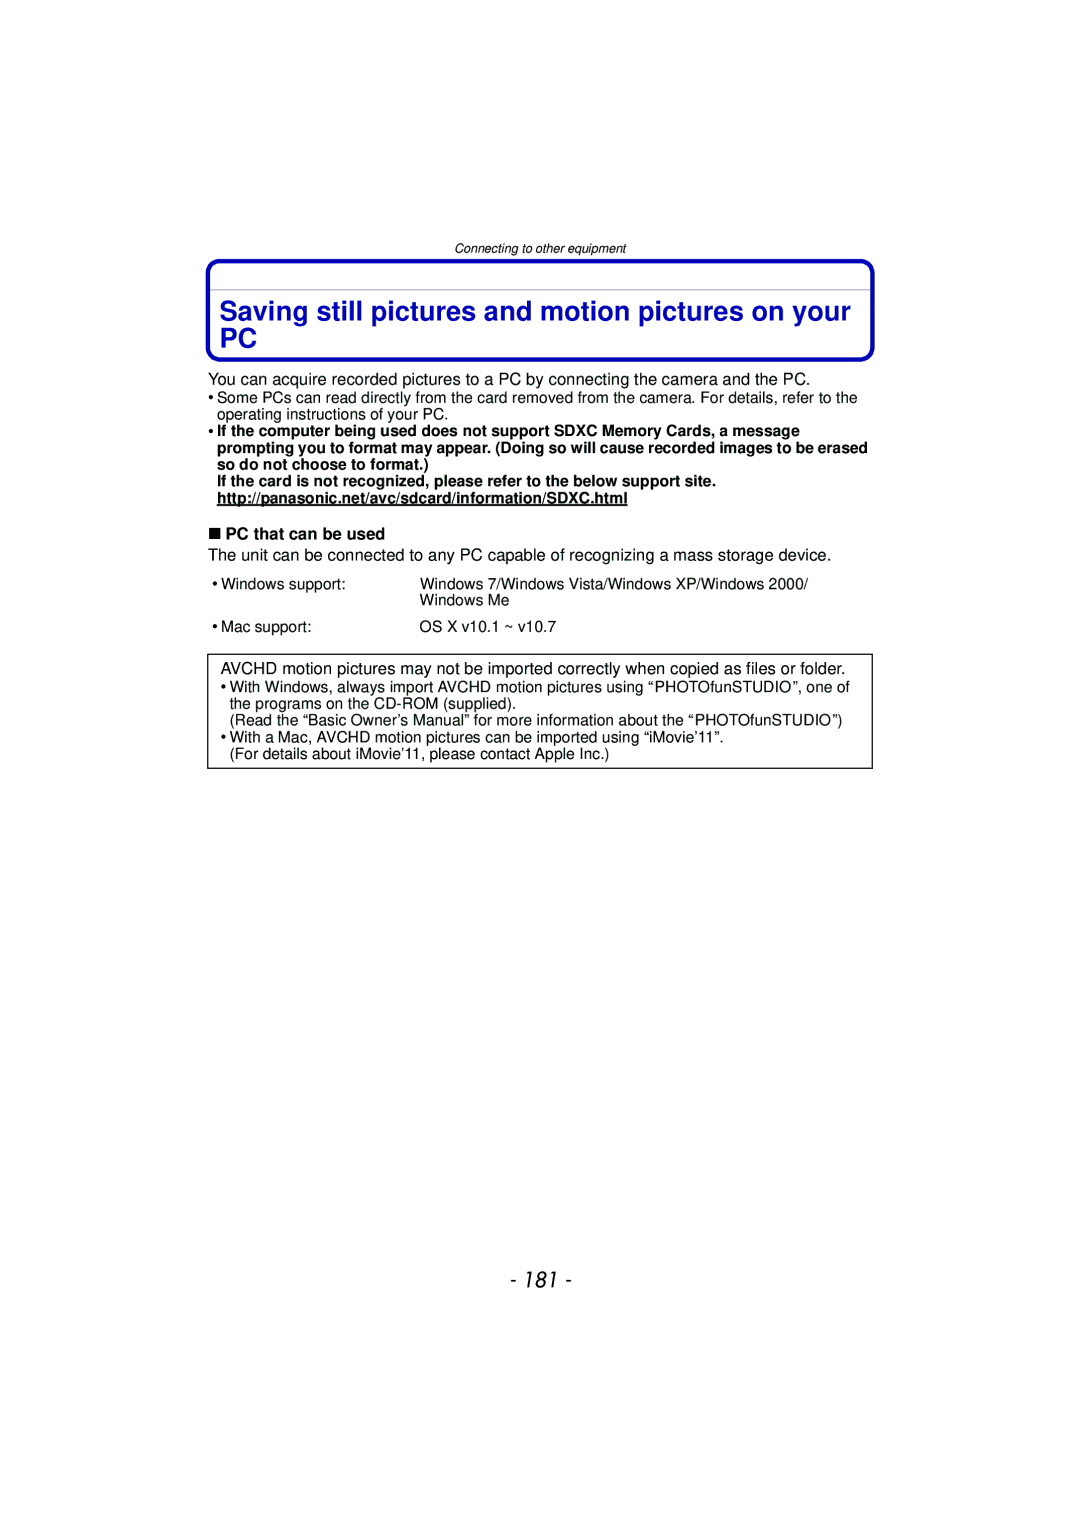 Panasonic DMC-GF5 owner manual Saving still pictures and motion pictures on your, 181, PC that can be used 